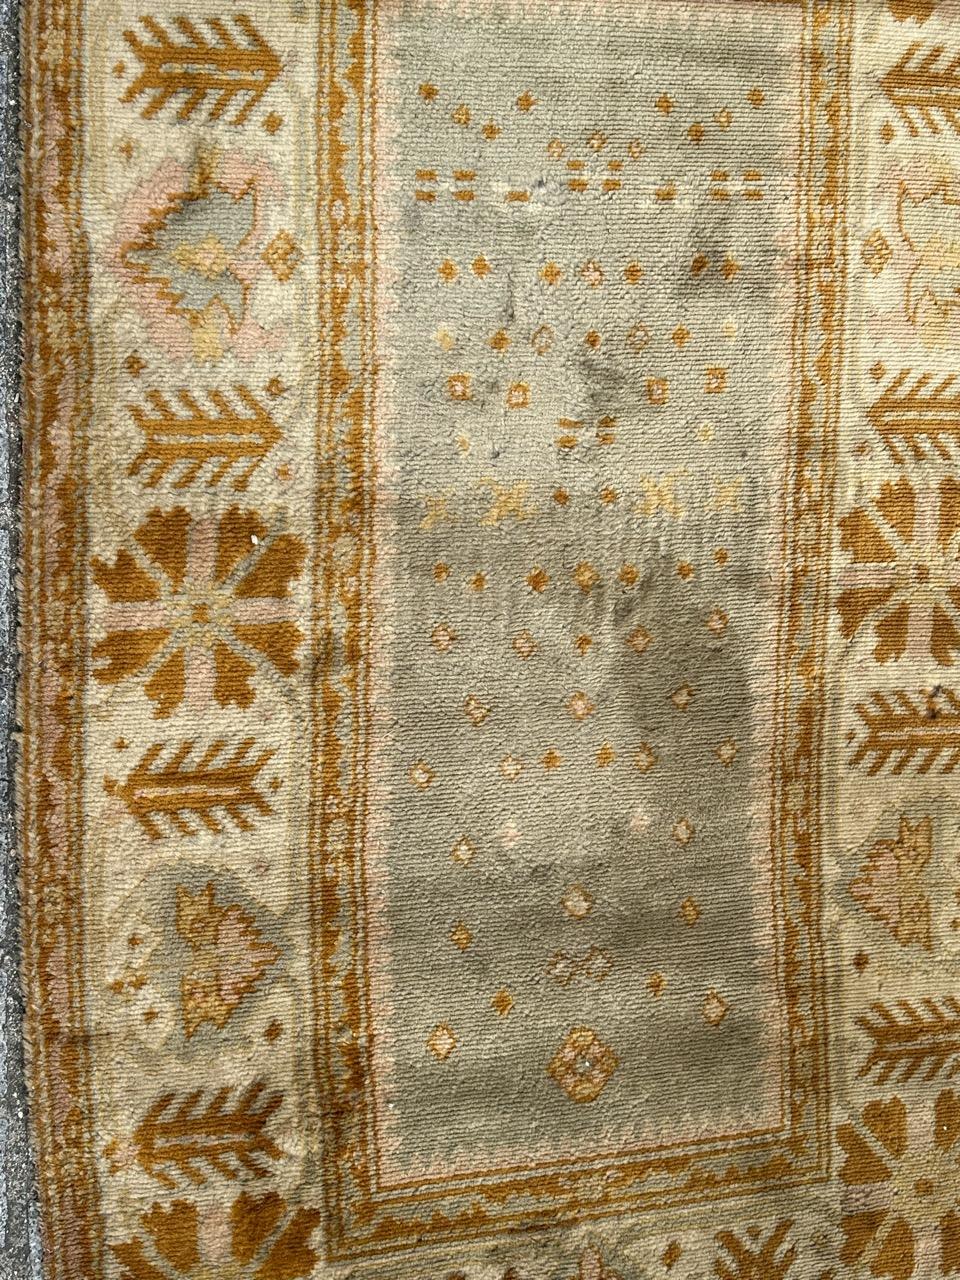 Nice vintage oushak style rug with a simple design and nice light colours, made in France by old mechanical looms, with wool.

✨✨✨
